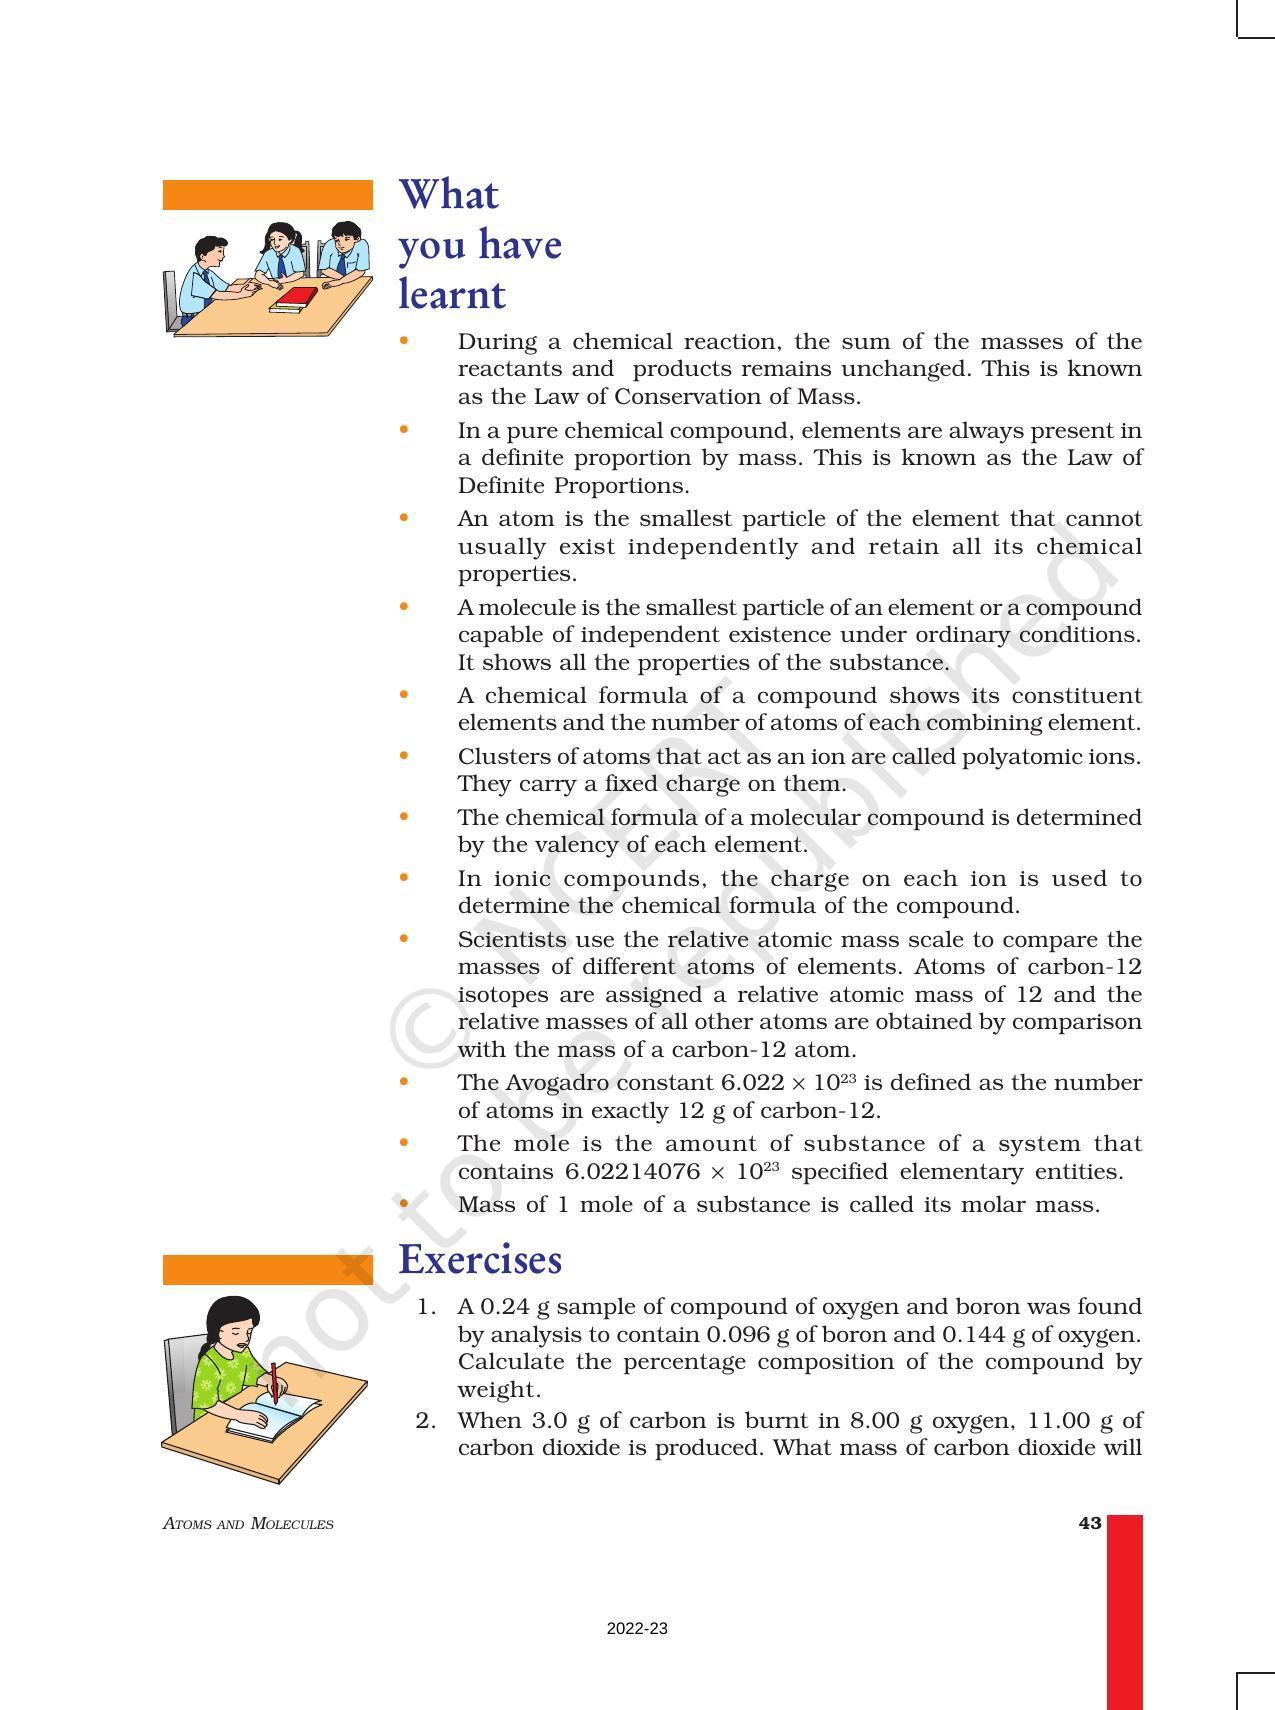 NCERT Book for Class 9 Science Chapter 3 Atoms And Molecules - Page 13